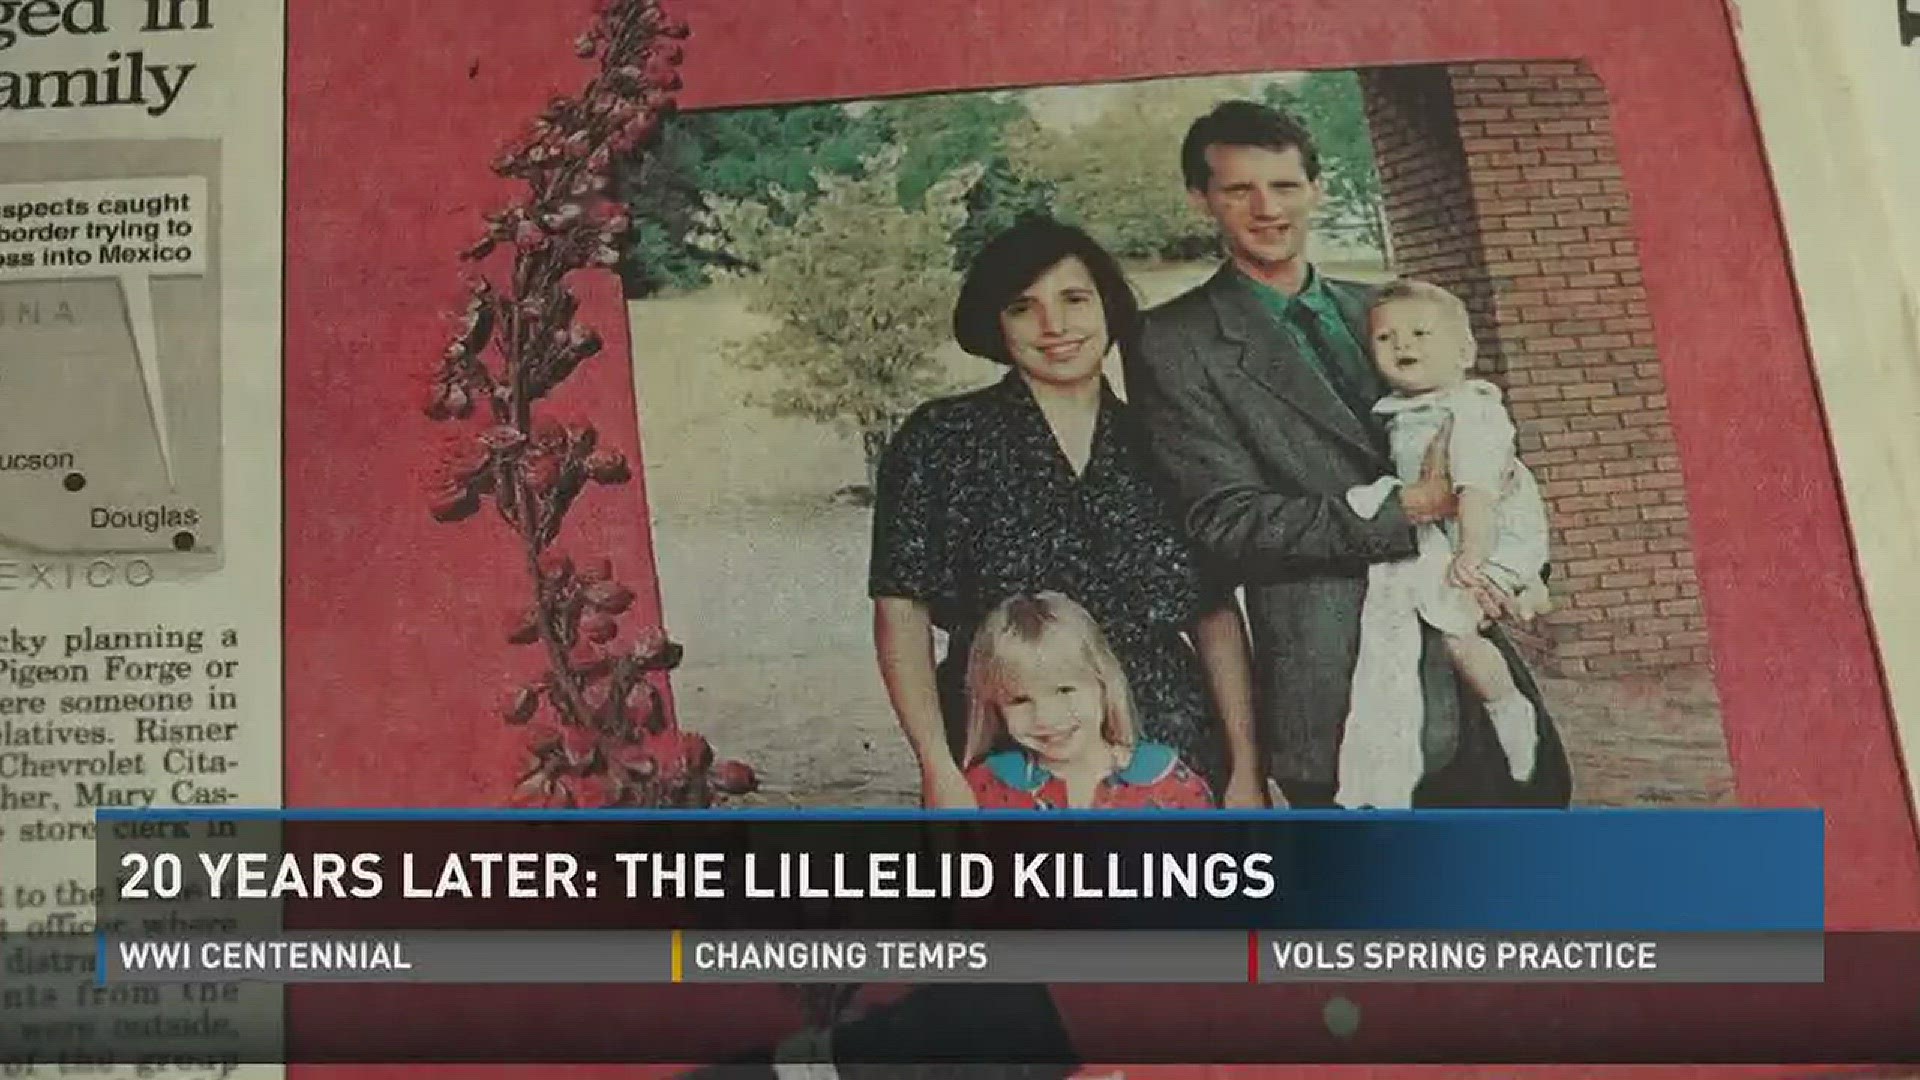 April 6, 2017: 20 years after the Lillelid killings, the brutal murders still resonate in East Tennessee.